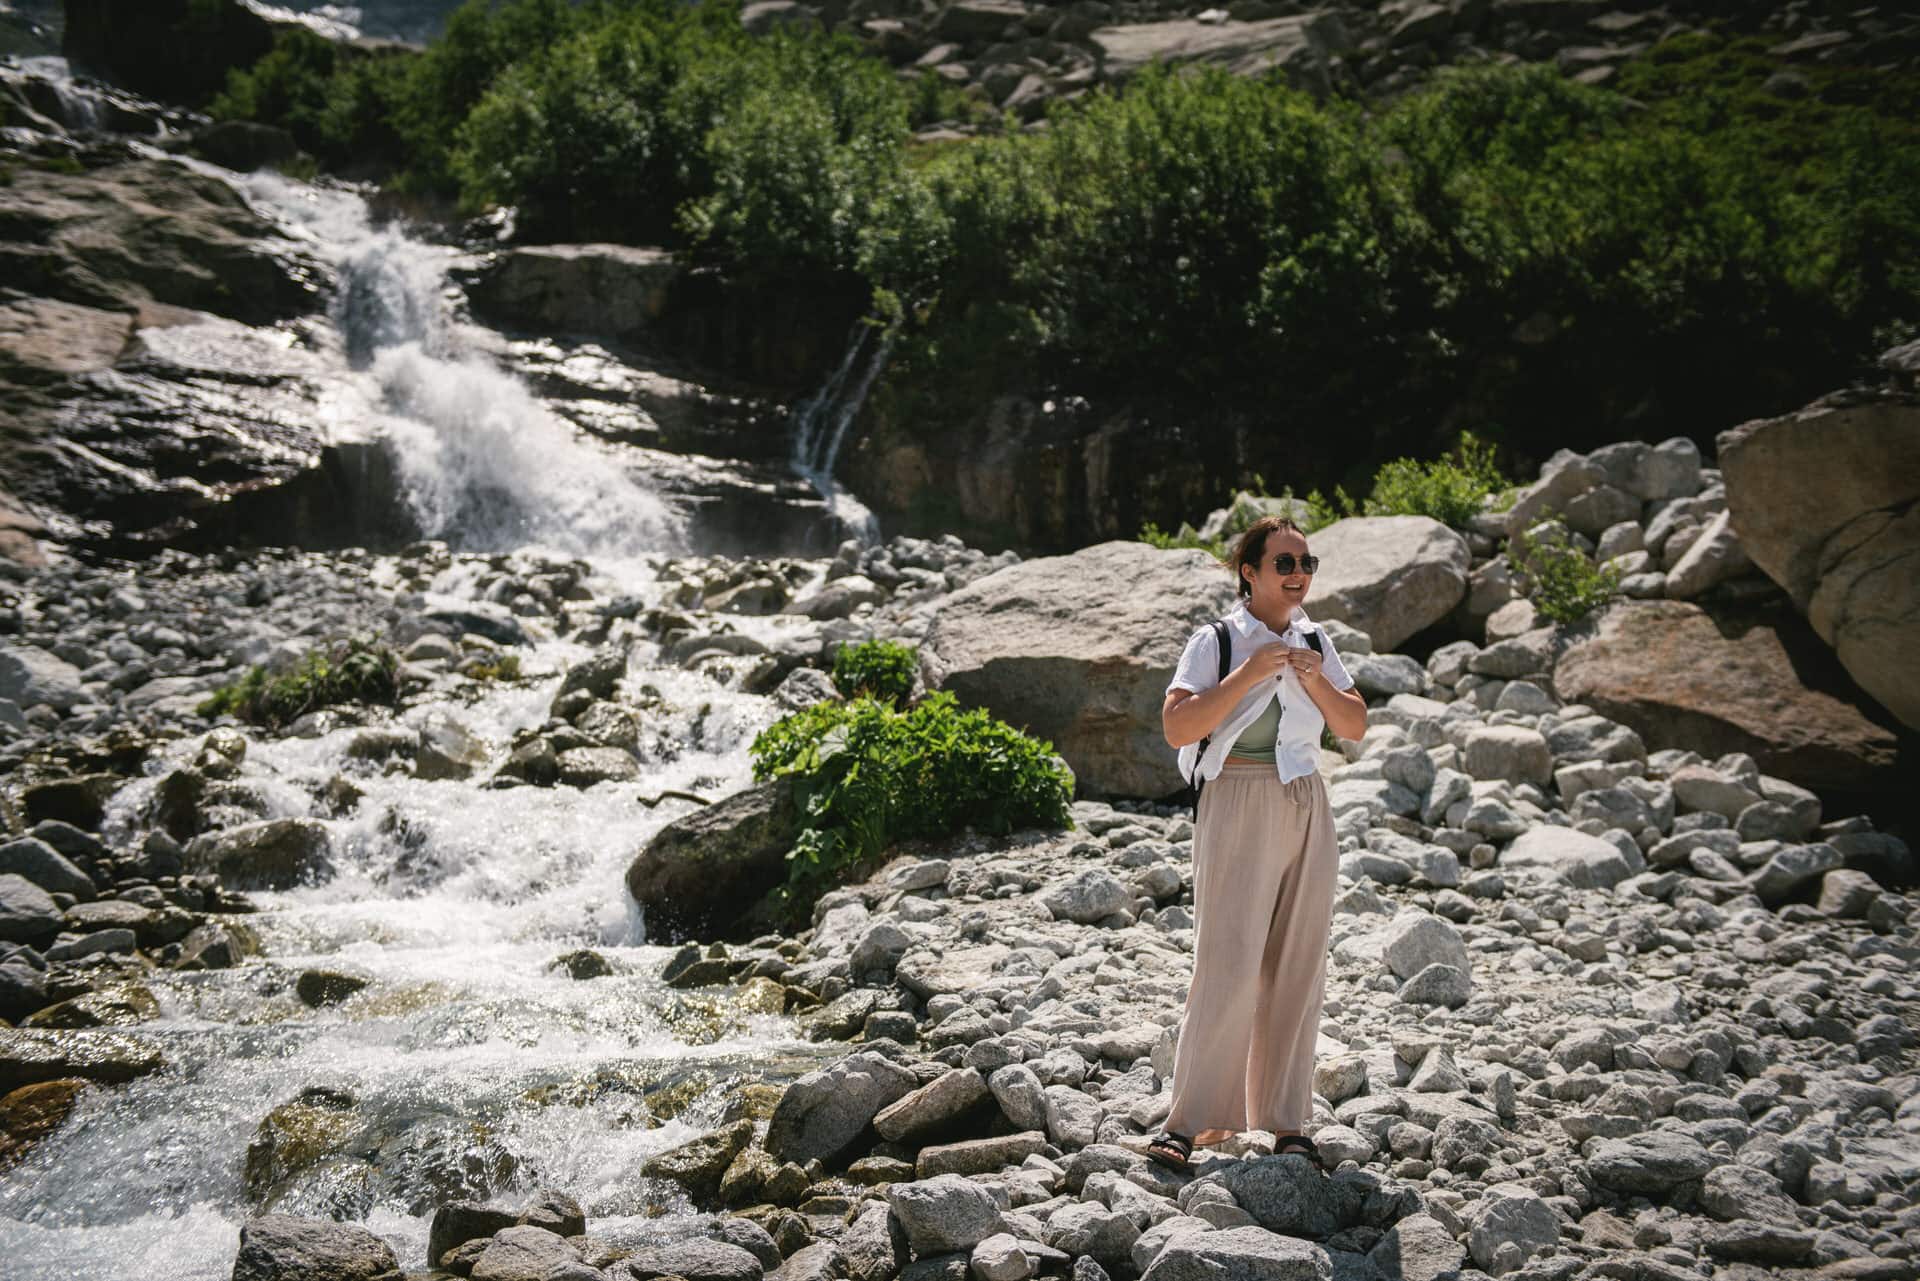 Peaks witnessed their journey of love - a breathtaking hiking elopement.